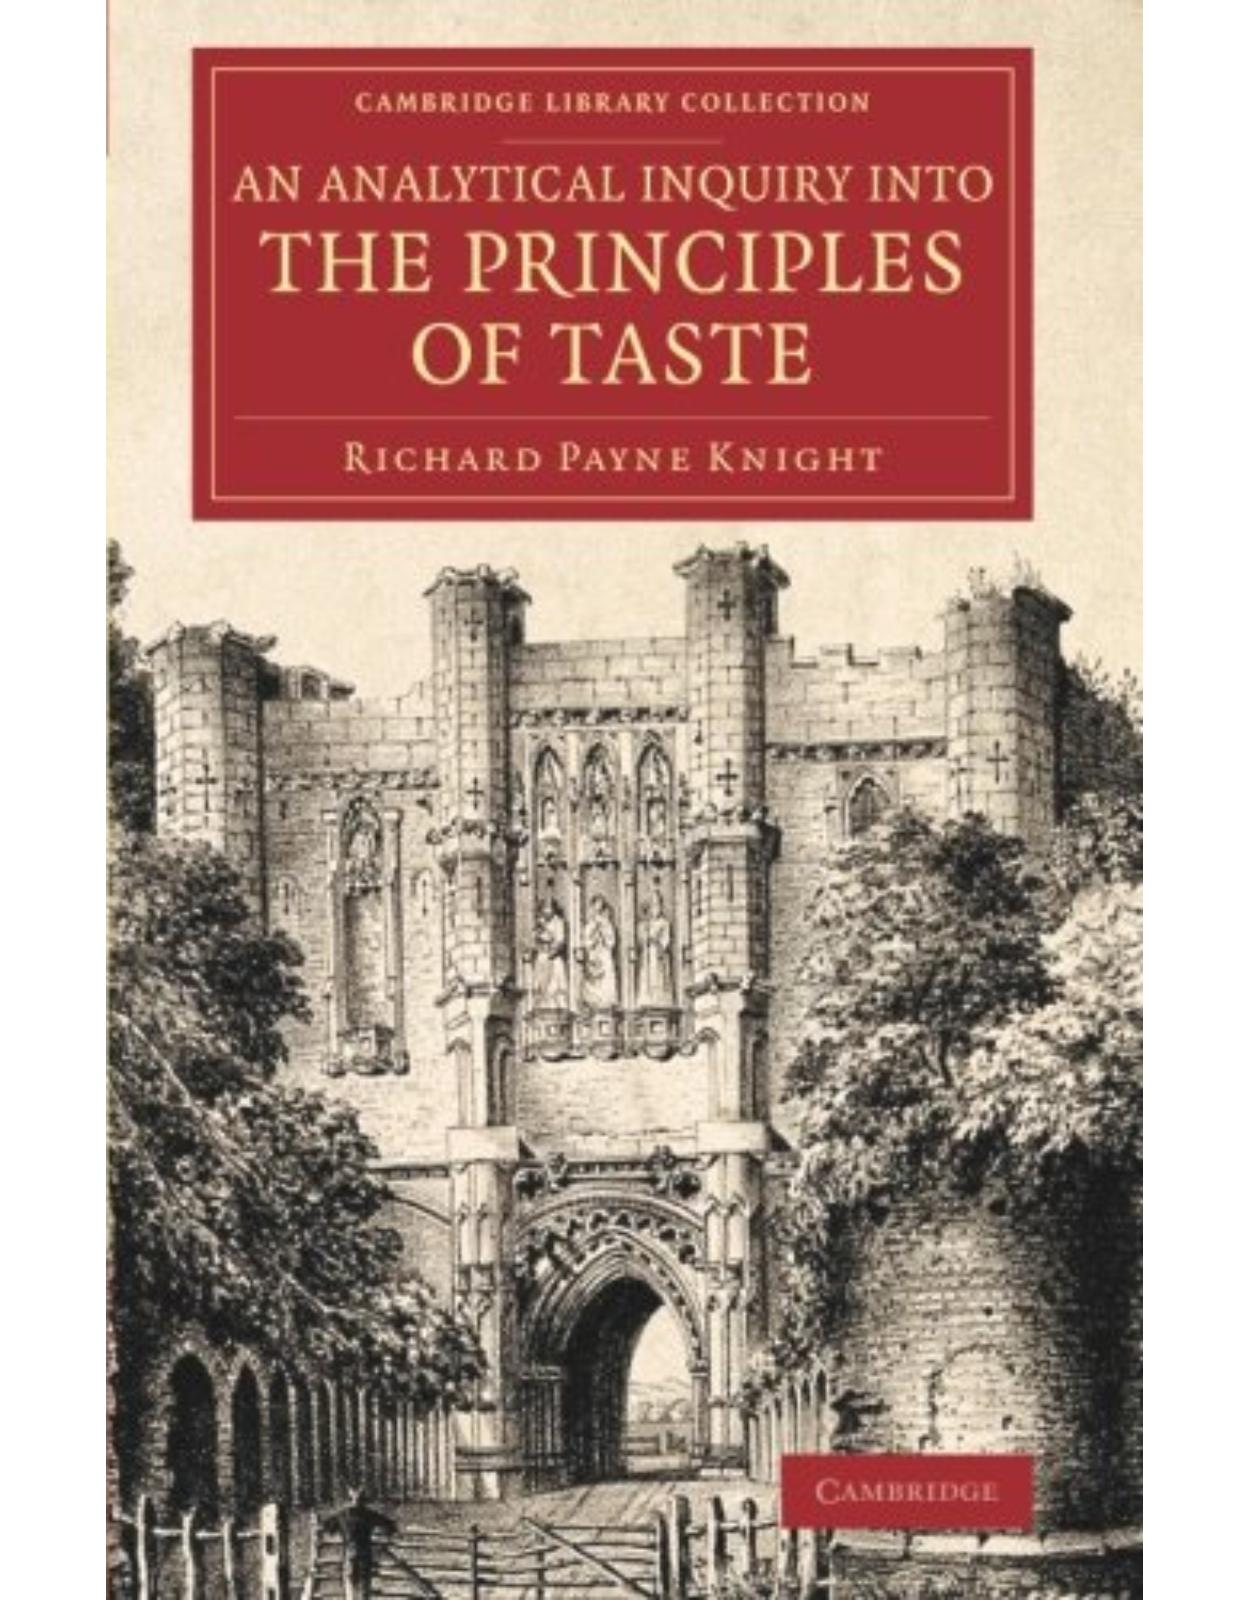 An Analytical Inquiry into the Principles of Taste (Cambridge Library Collection - Art and Architecture)